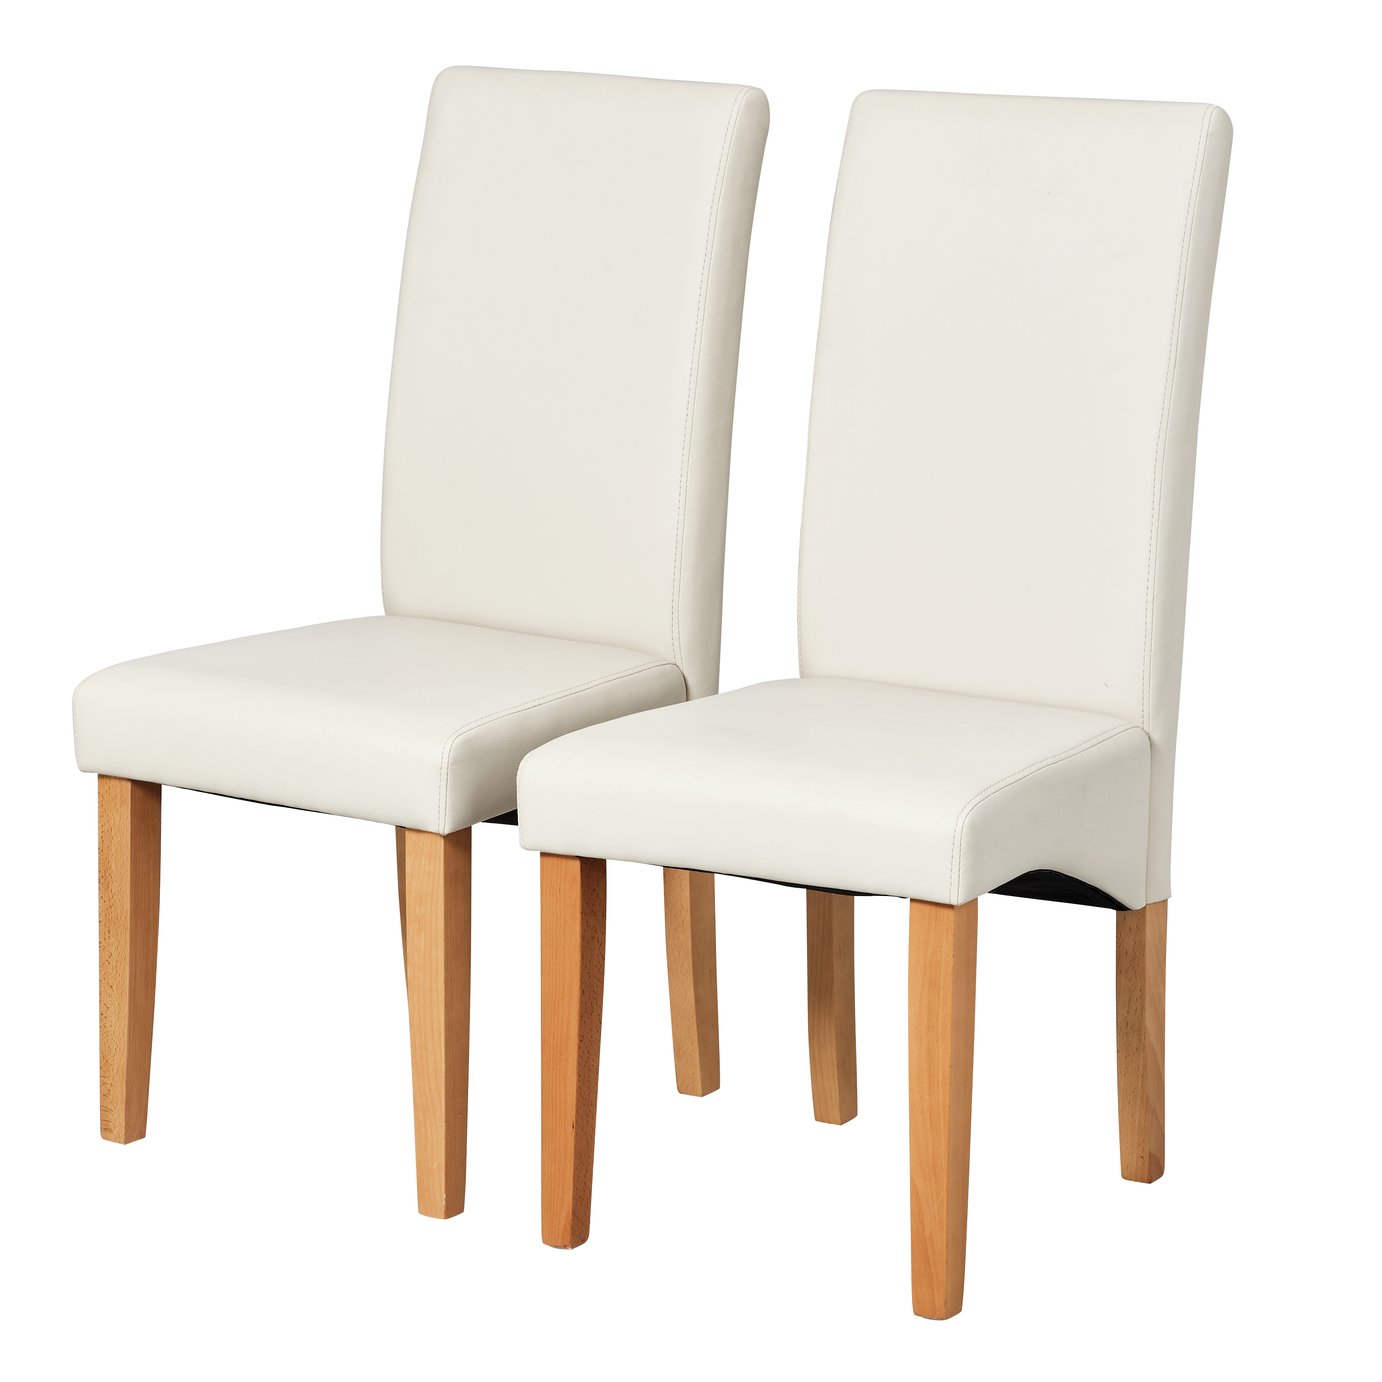 Argos Home Pair of Skirted Dining Chairs - Cream